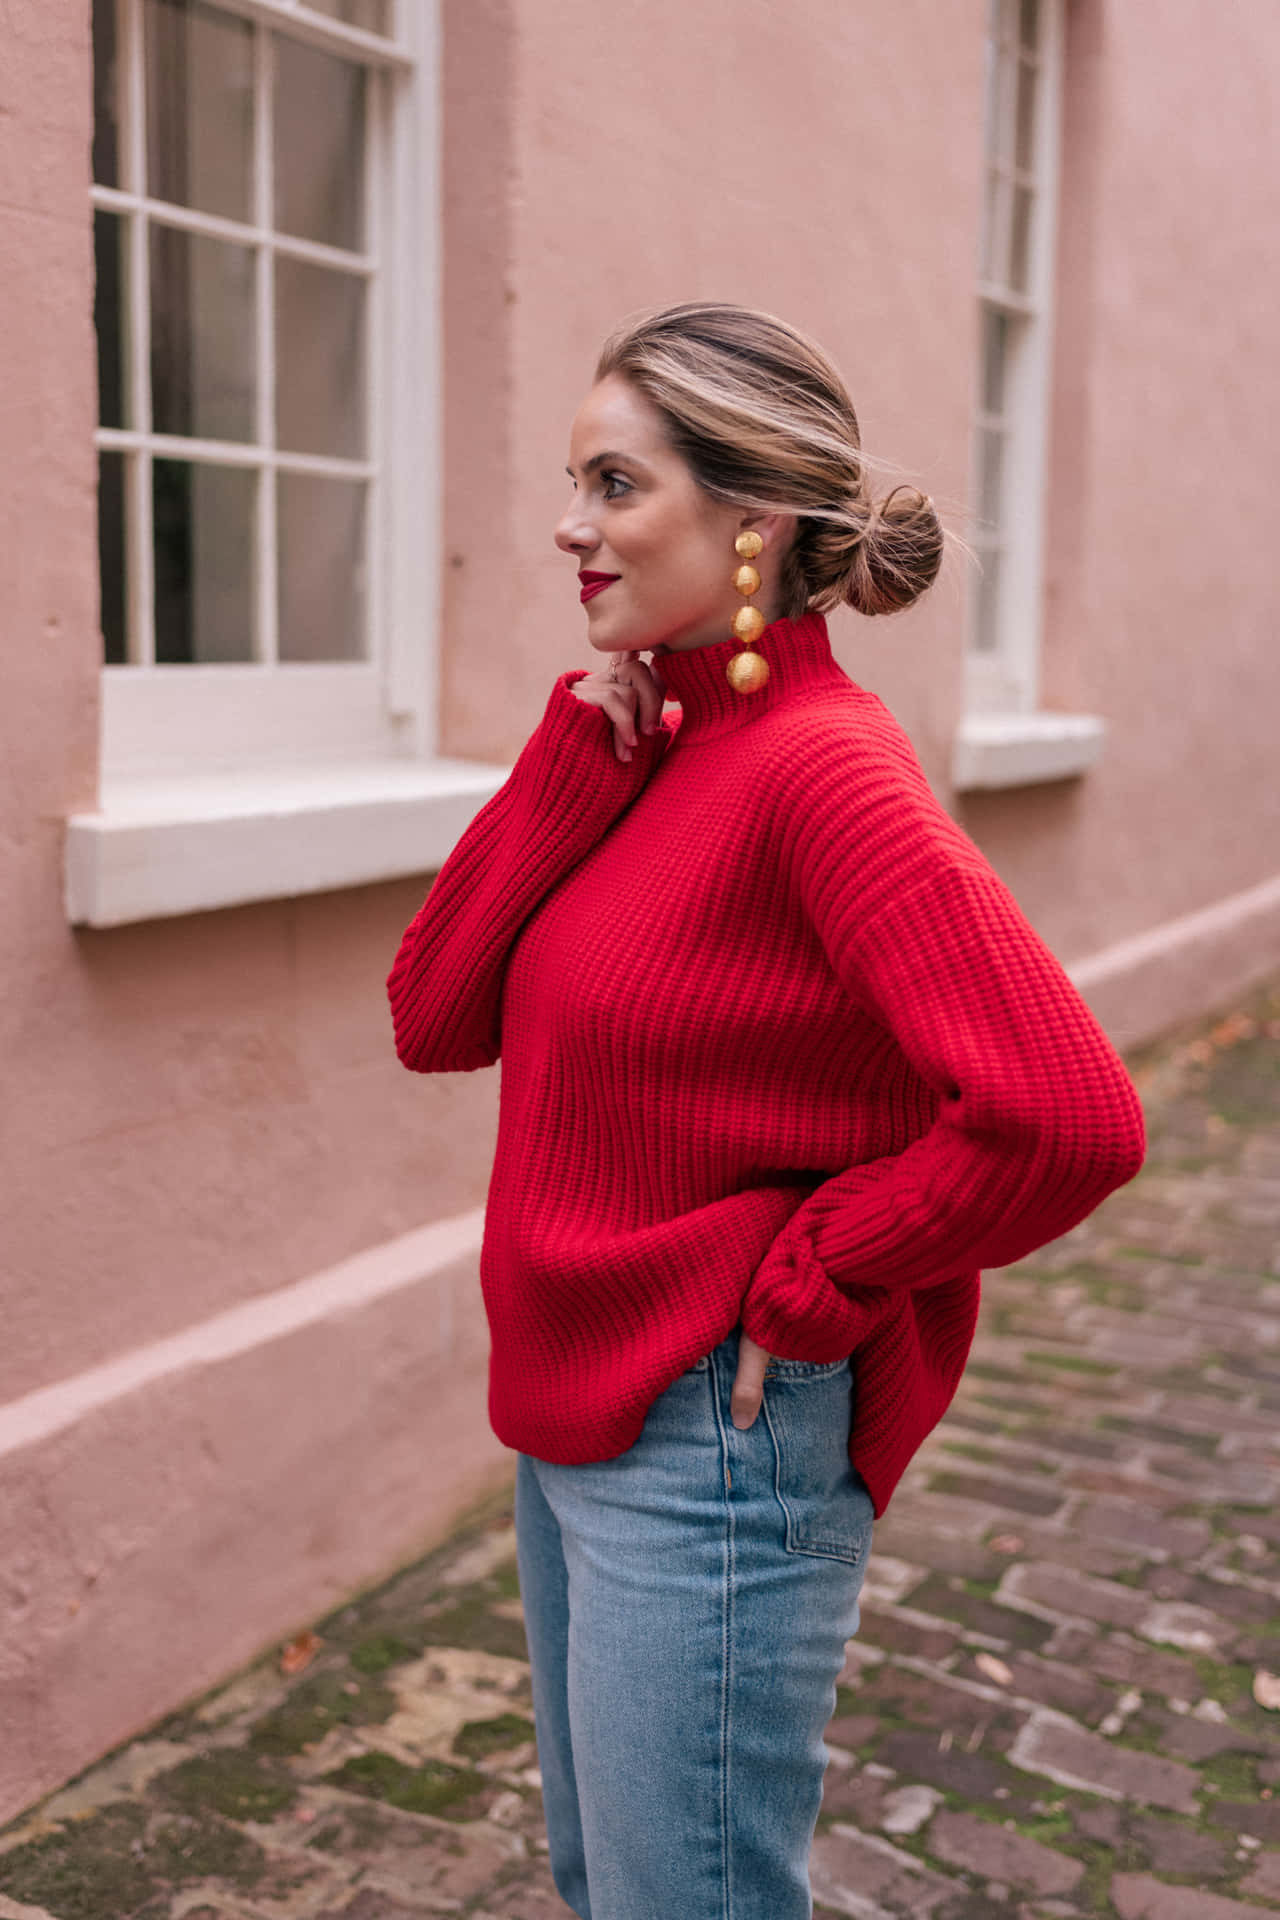 Woman in Stylish Red Sweater Wallpaper